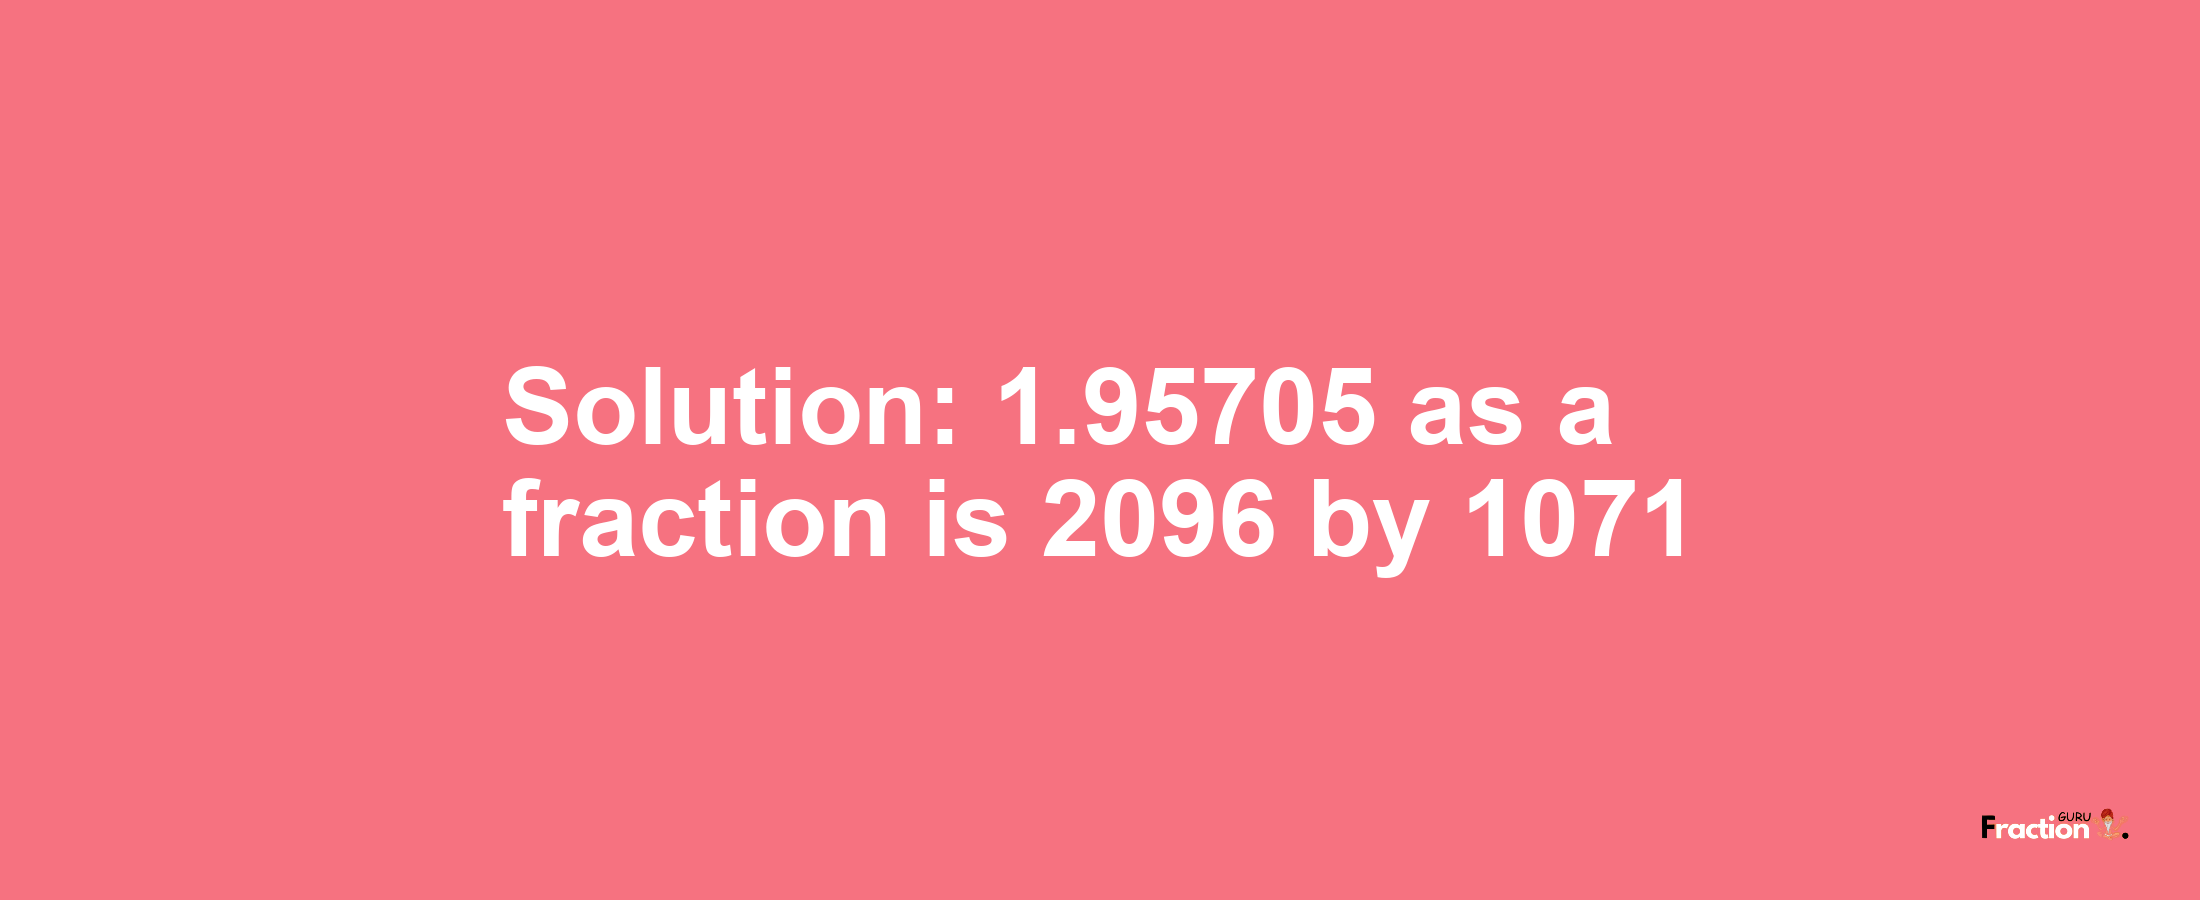 Solution:1.95705 as a fraction is 2096/1071